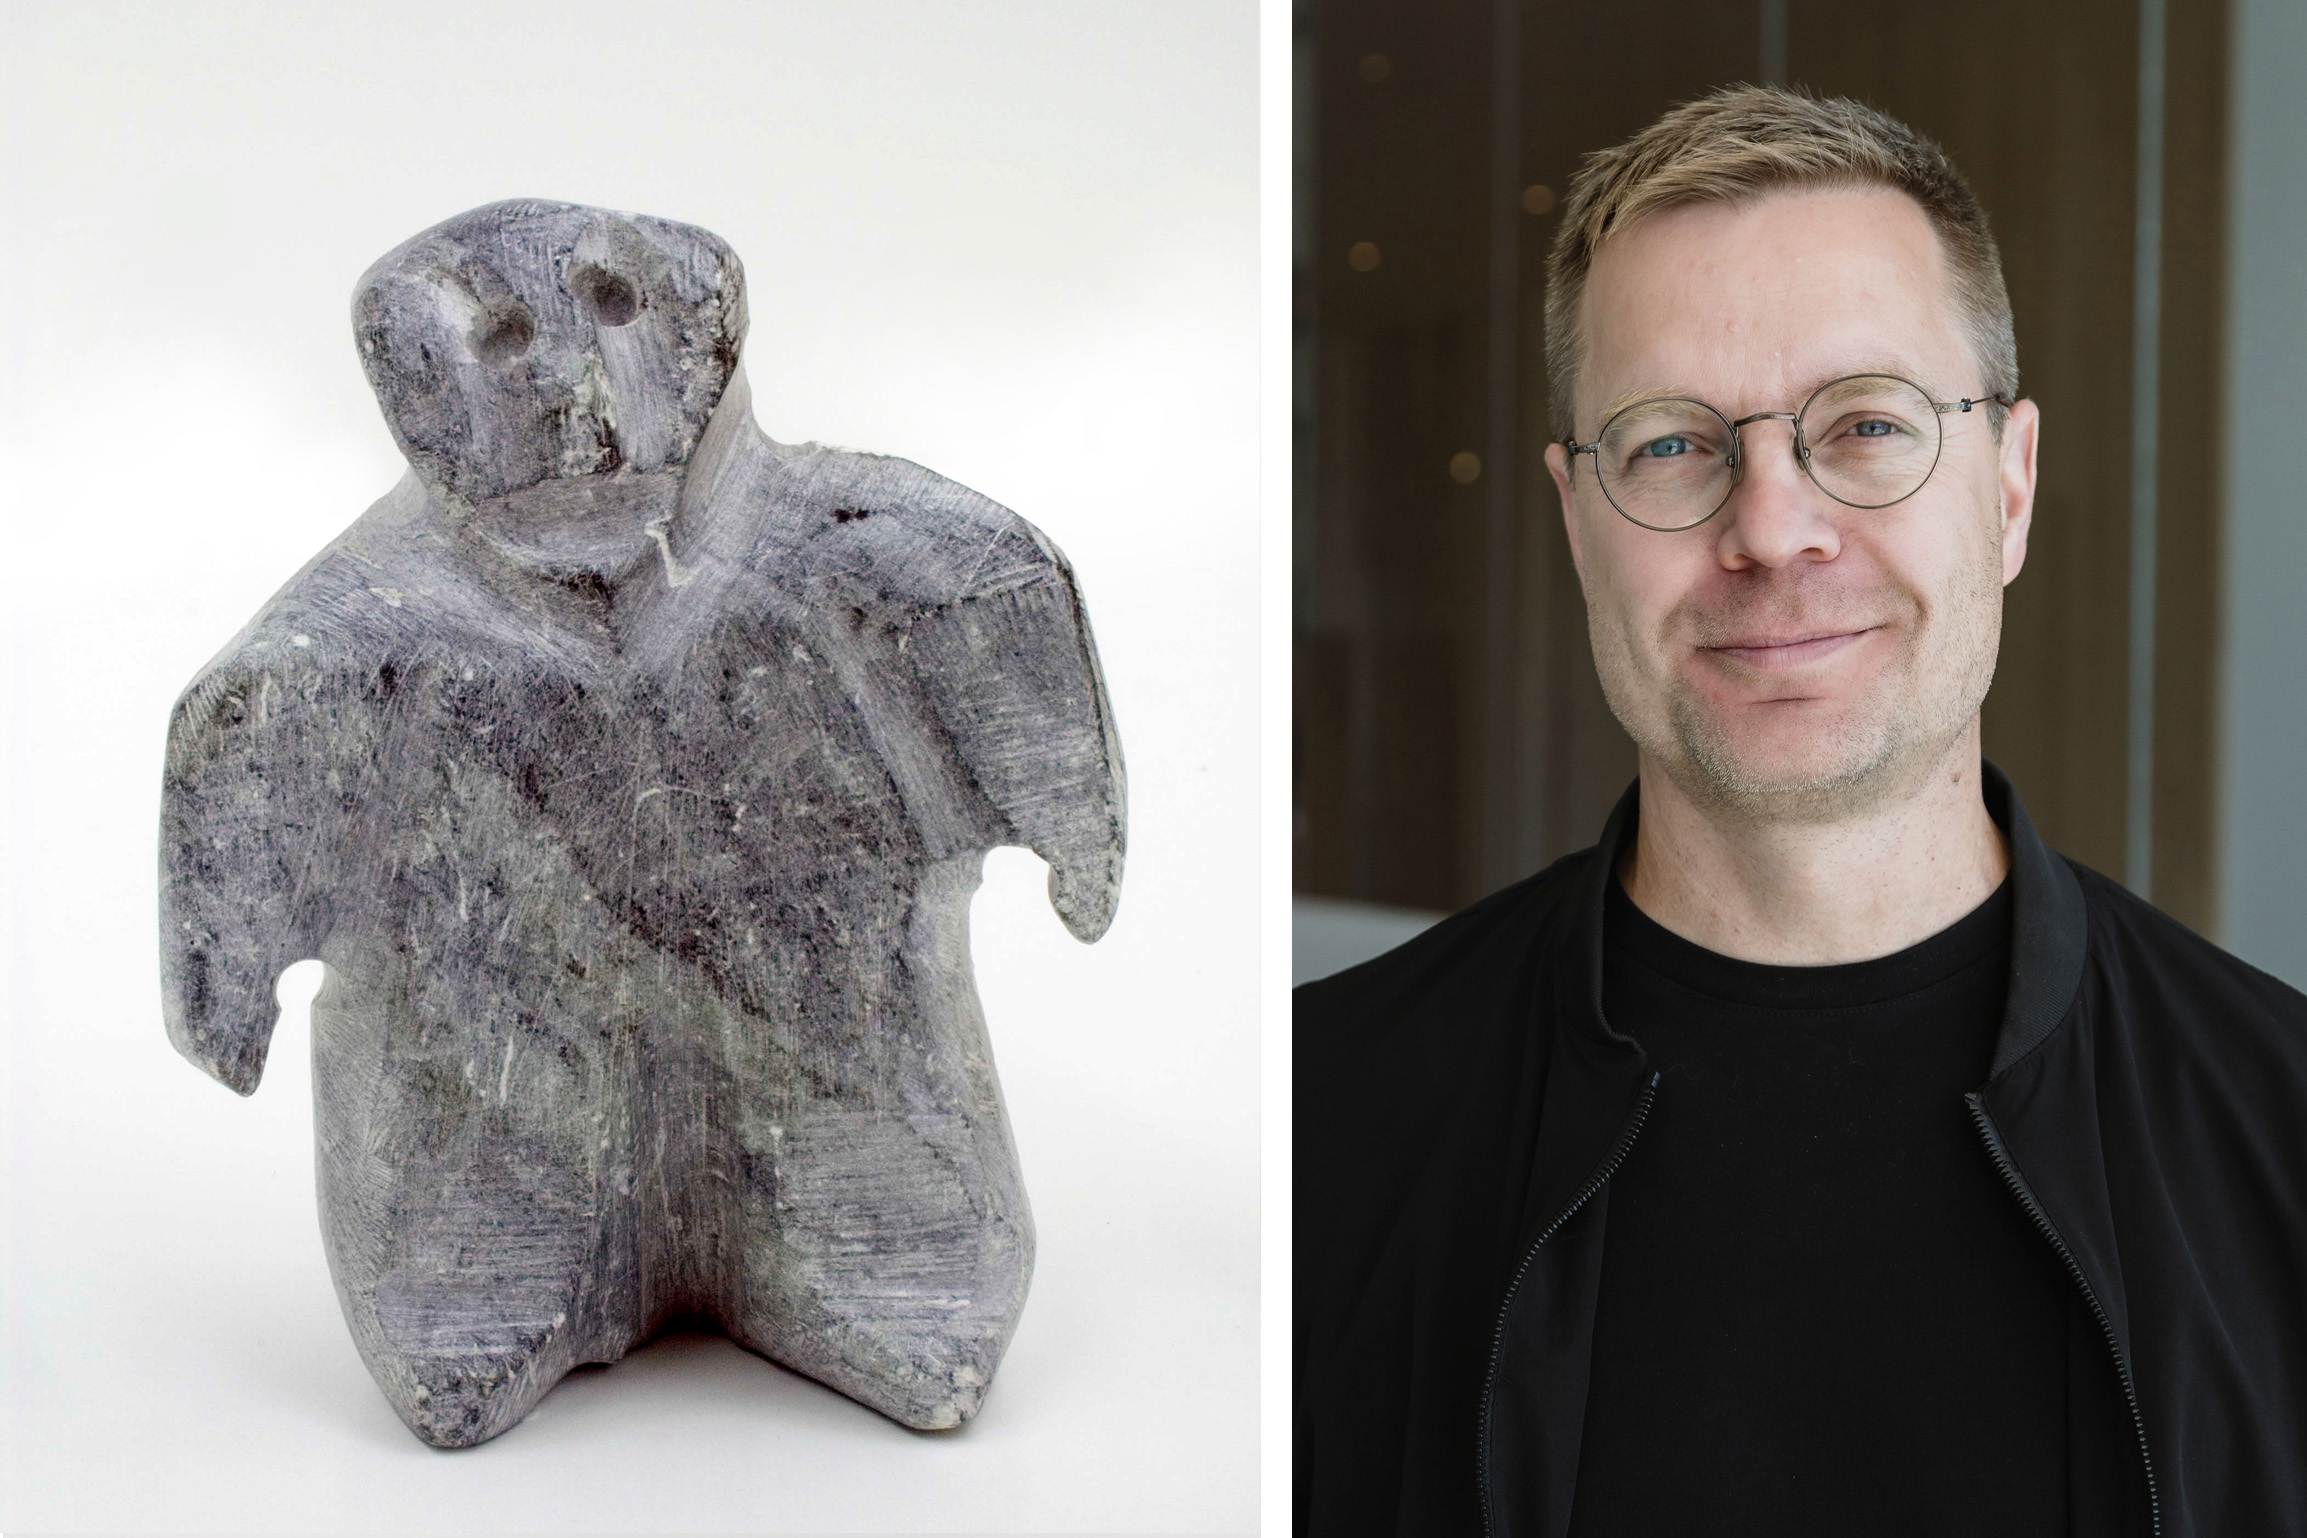 Left: John Kavik, Standing Figure, c. 1982, stone, 9.2 x 7.4 x 4.5 cm. The Mendel Art Gallery Collection at Remai Modern. Gift of Jean Williamson, 2011. Right: Curator Troy Gronsdahl.